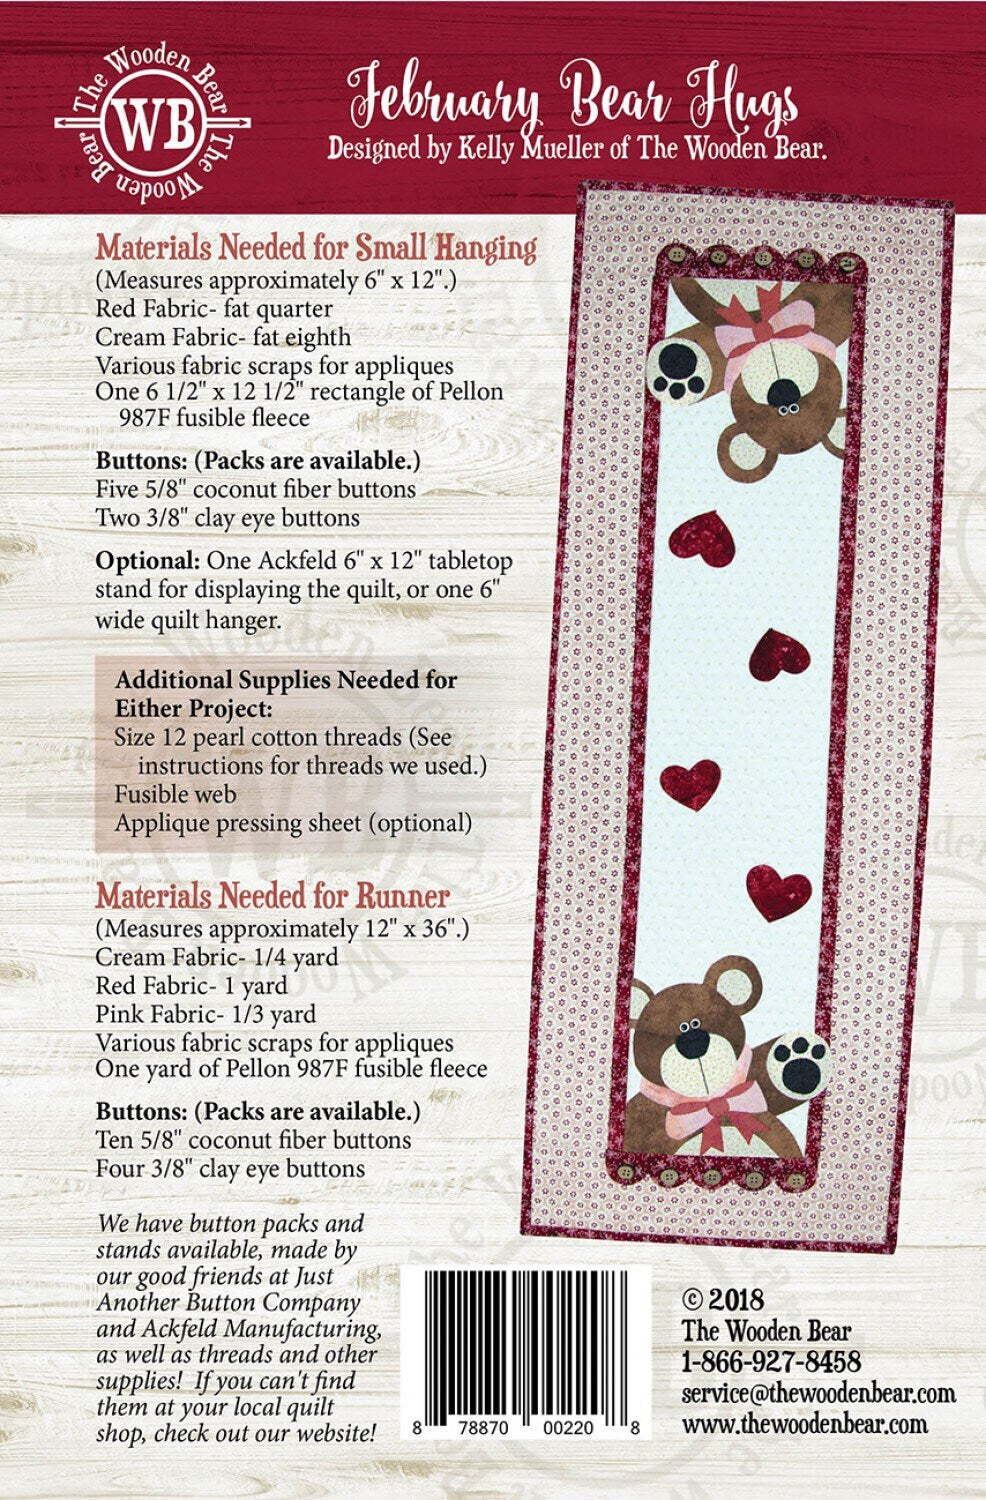 The Wooden Bear February Bear Hugs Mini Quilt Pattern - Little Quilts Series - Buttons Included